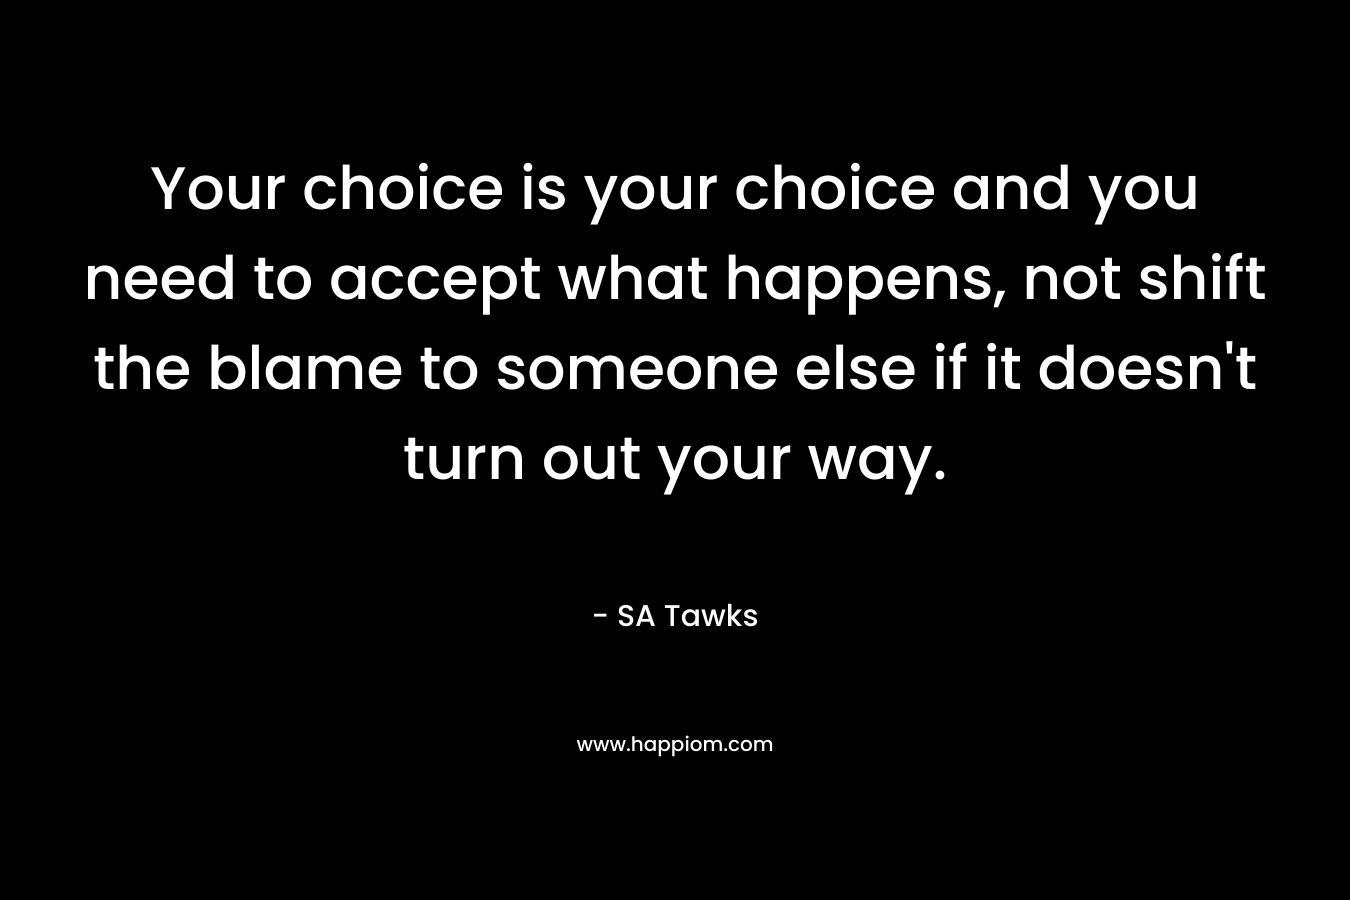 Your choice is your choice and you need to accept what happens, not shift the blame to someone else if it doesn't turn out your way.